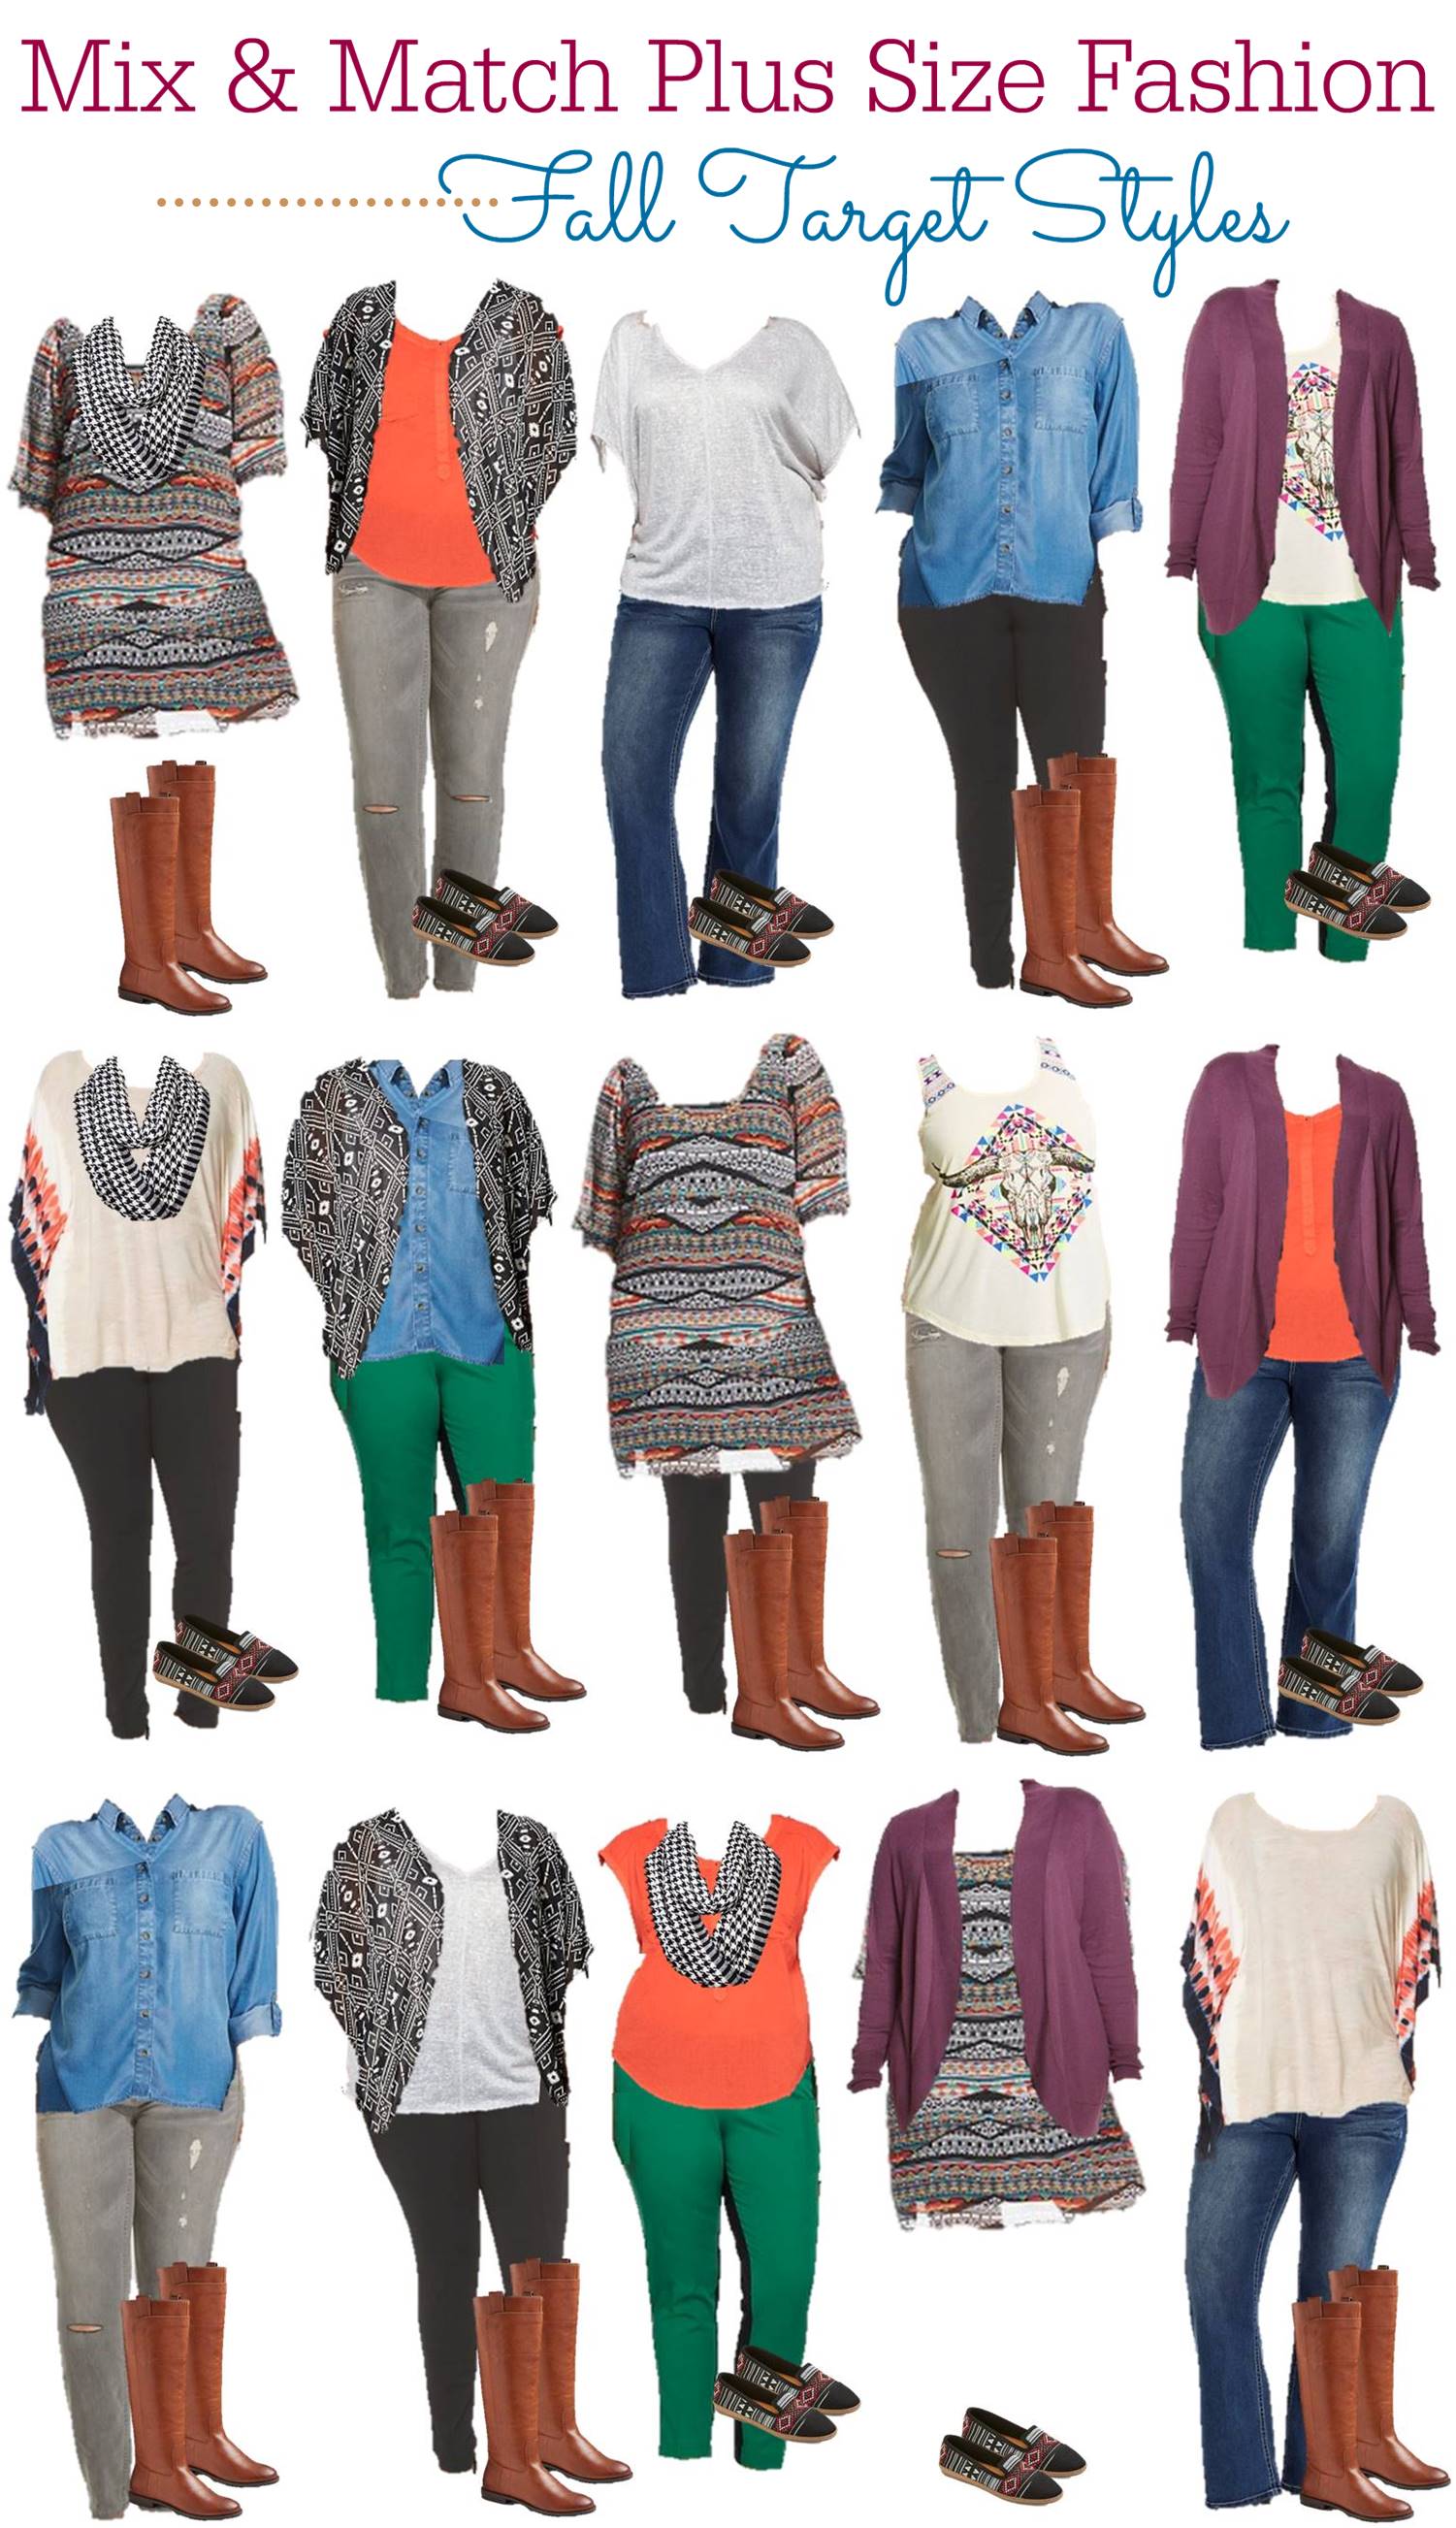 Target Plus Size Fall Styles